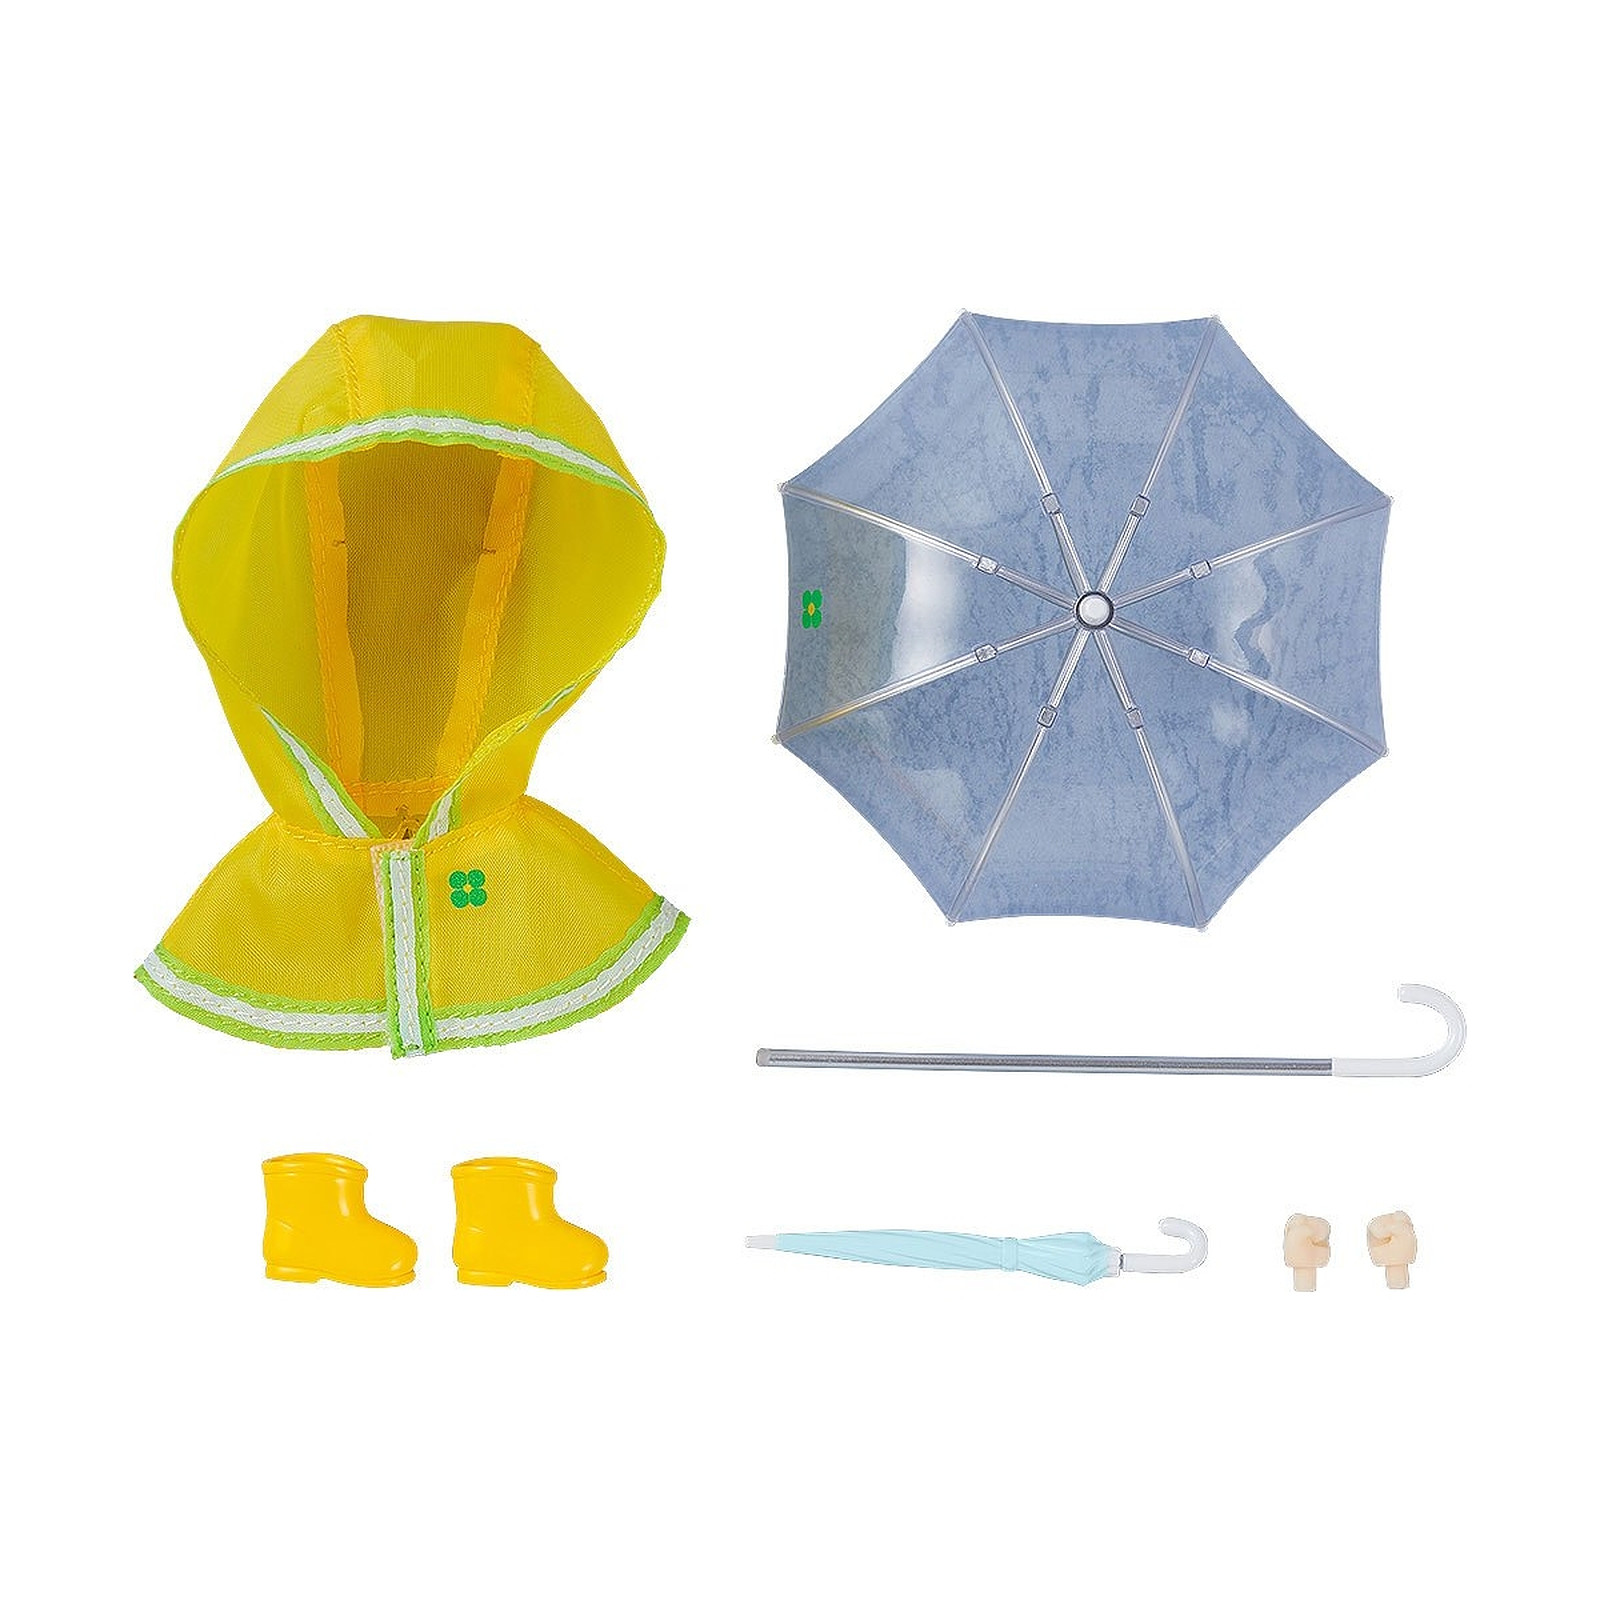 Original Character - Accessoires pour figurines Nendoroid Doll Outfit Set Rain Poncho - Yellow - Figurines Good Smile Company